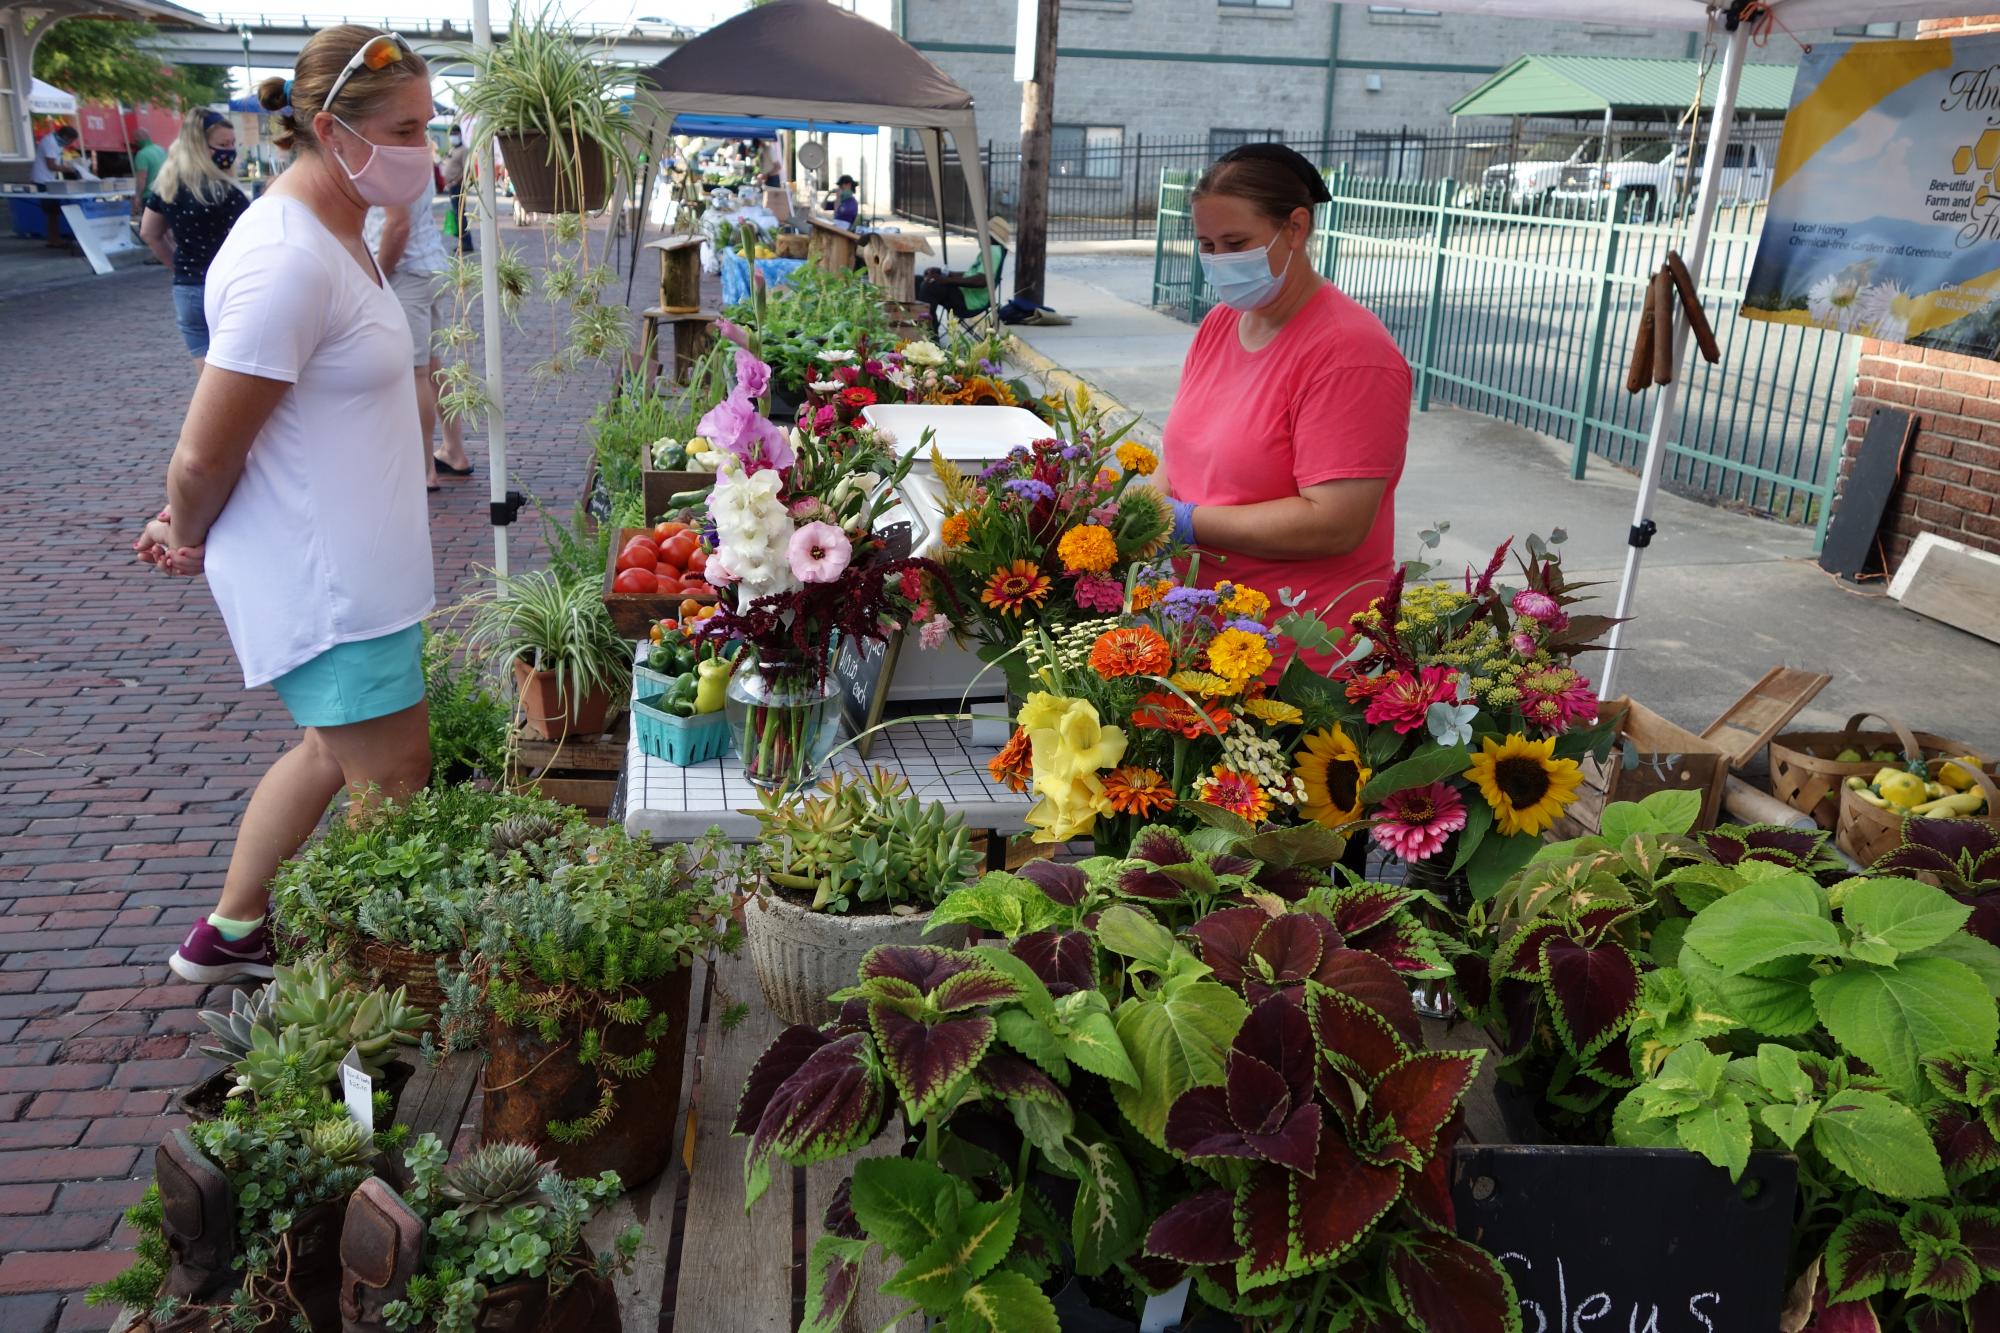 Farmers market vendor selling flowers and plants